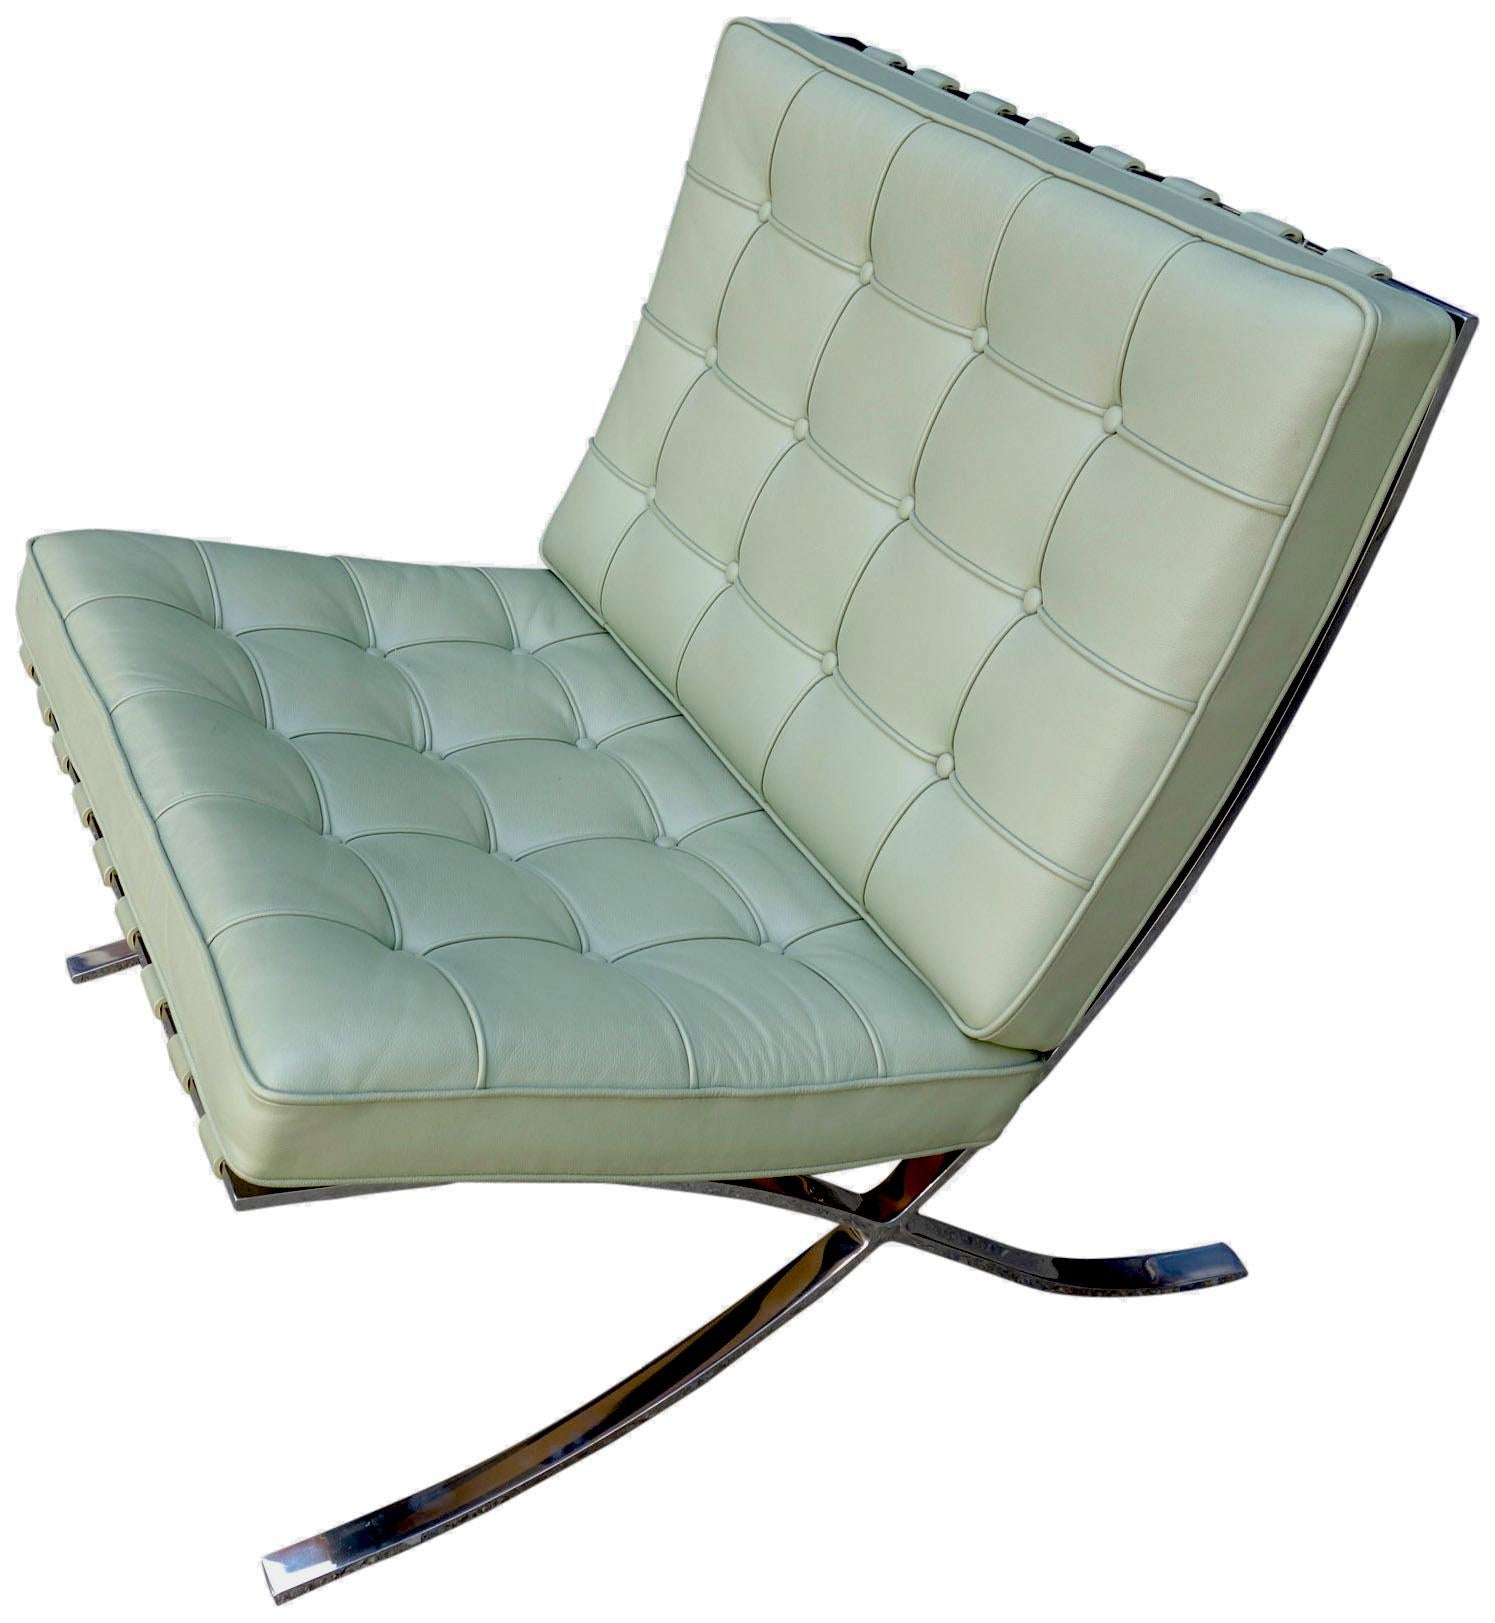 20th Century Midcentury Barcelona Chair in Special Order Stainless Steel and Leather